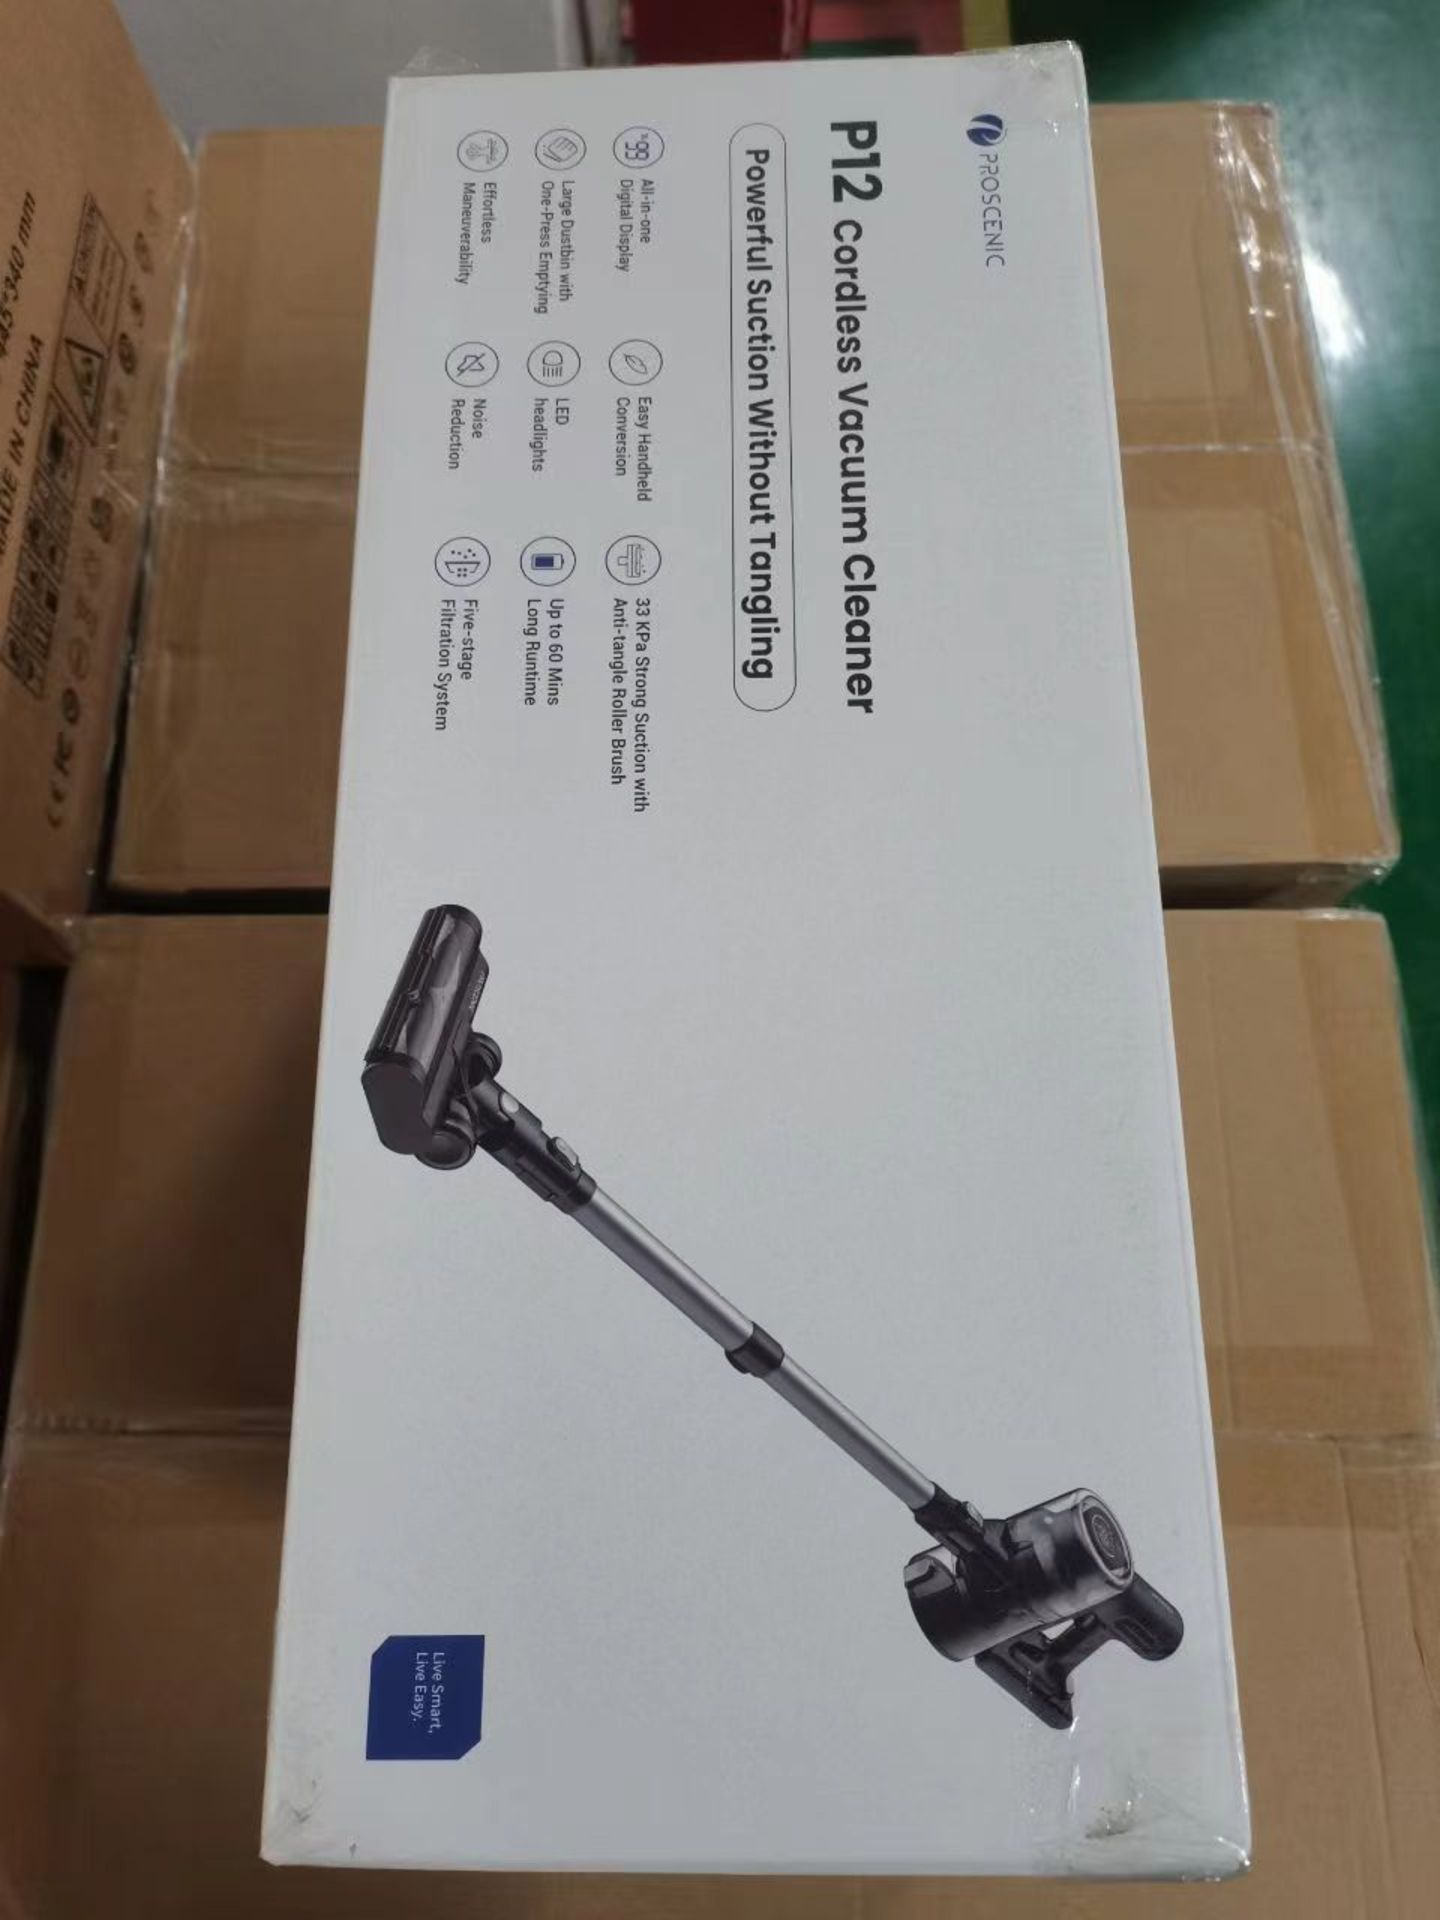 TRADE LOT 4 x New & Boxed Proscenic P12 Cordless Vacuum Cleaner, 33Kpa Stick Vacuum Cleaner with - Image 8 of 10